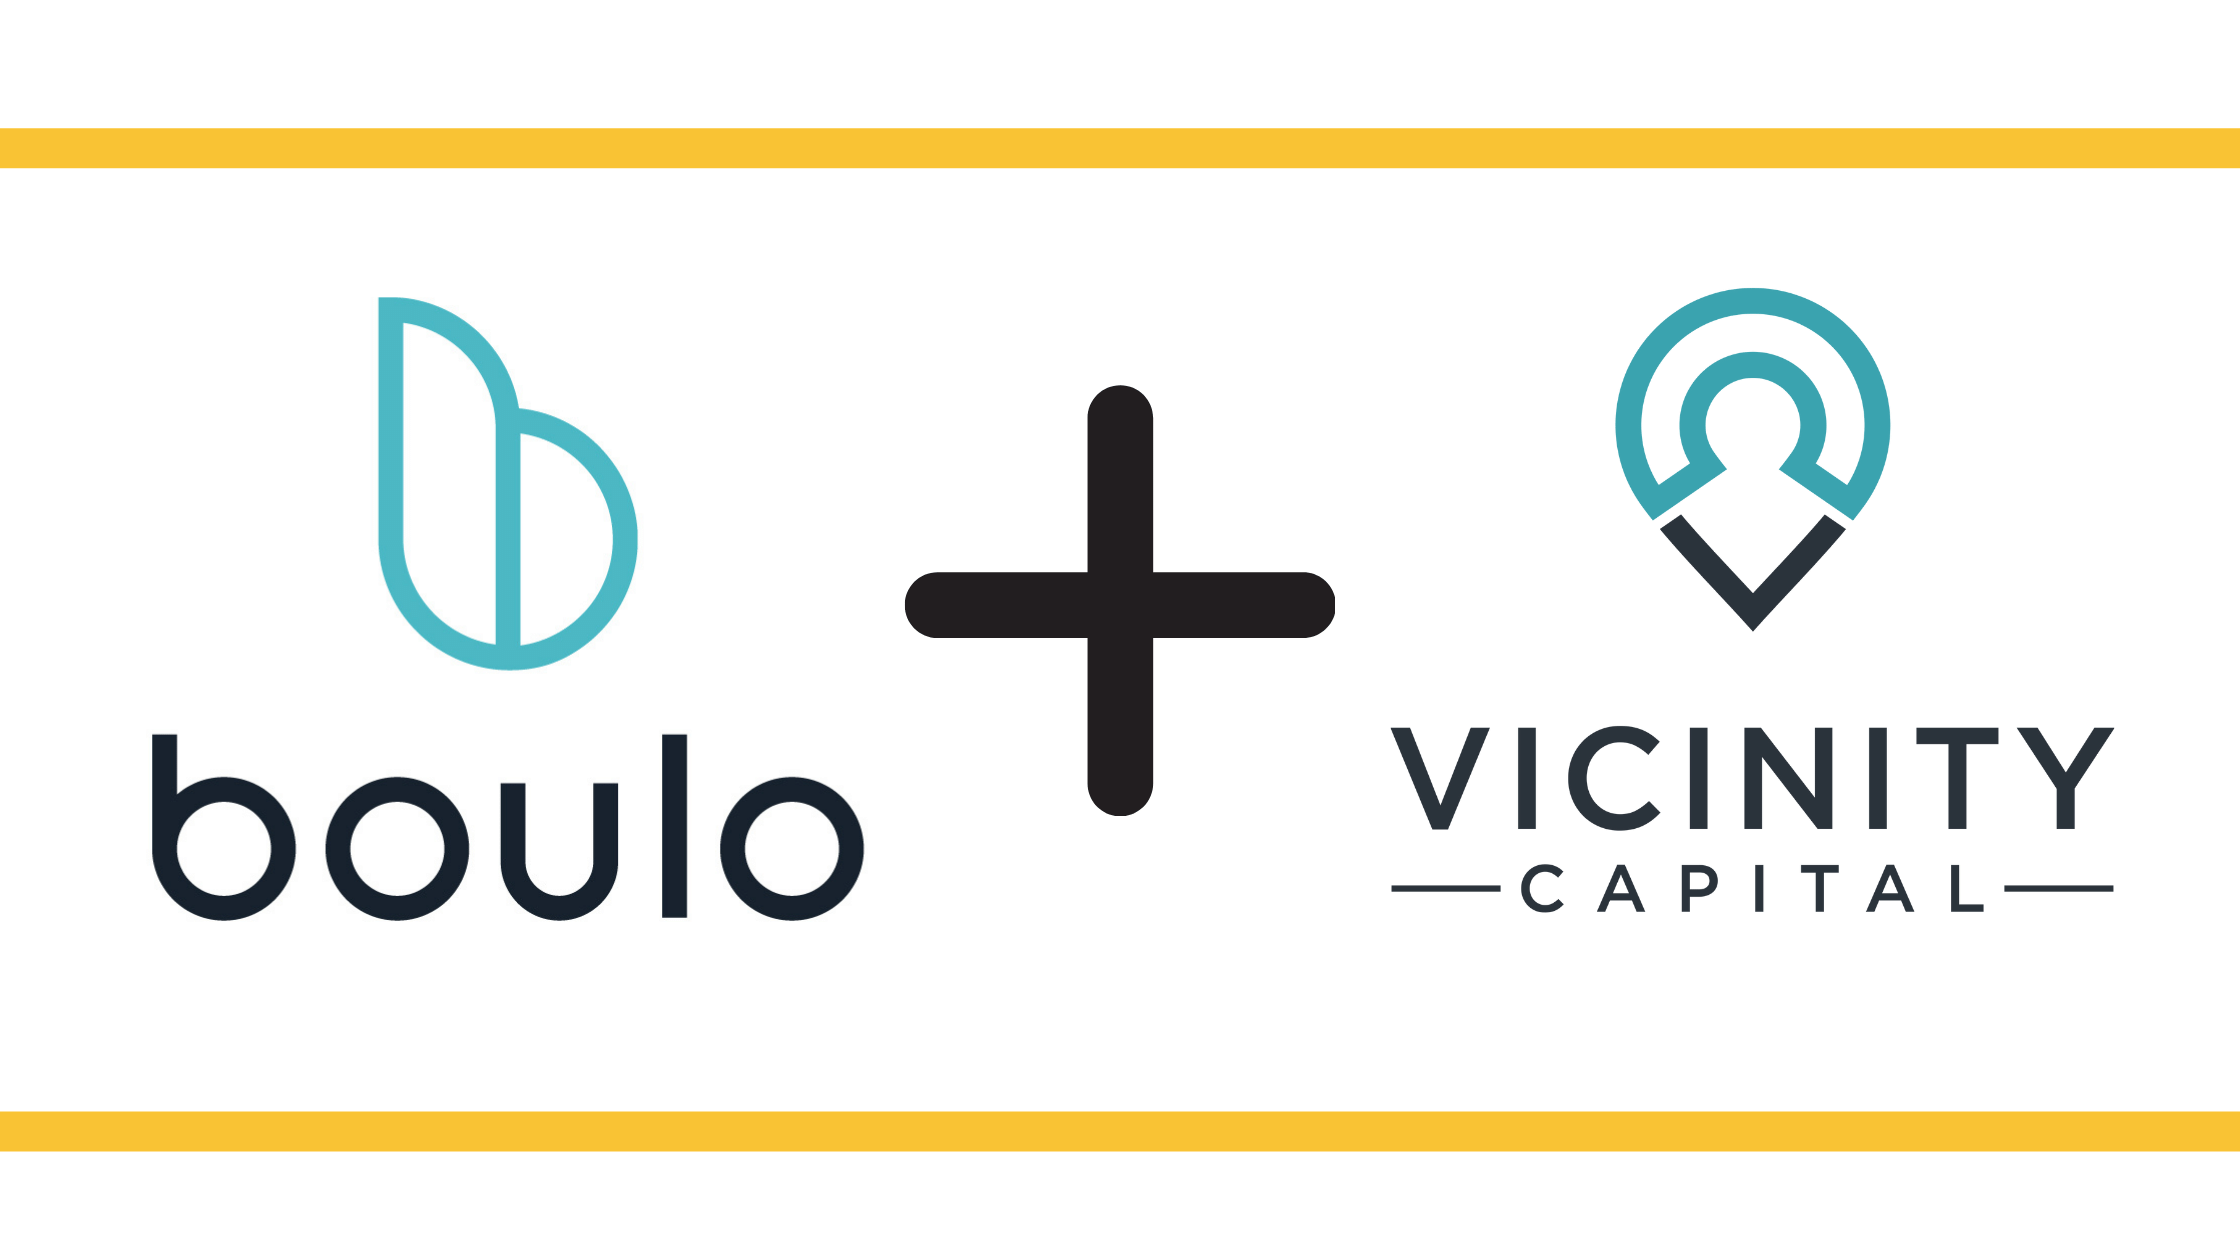 Boulo logo plus Vicinity Capital logo indicating partnering for fundraising story in Birmingham Business Journal